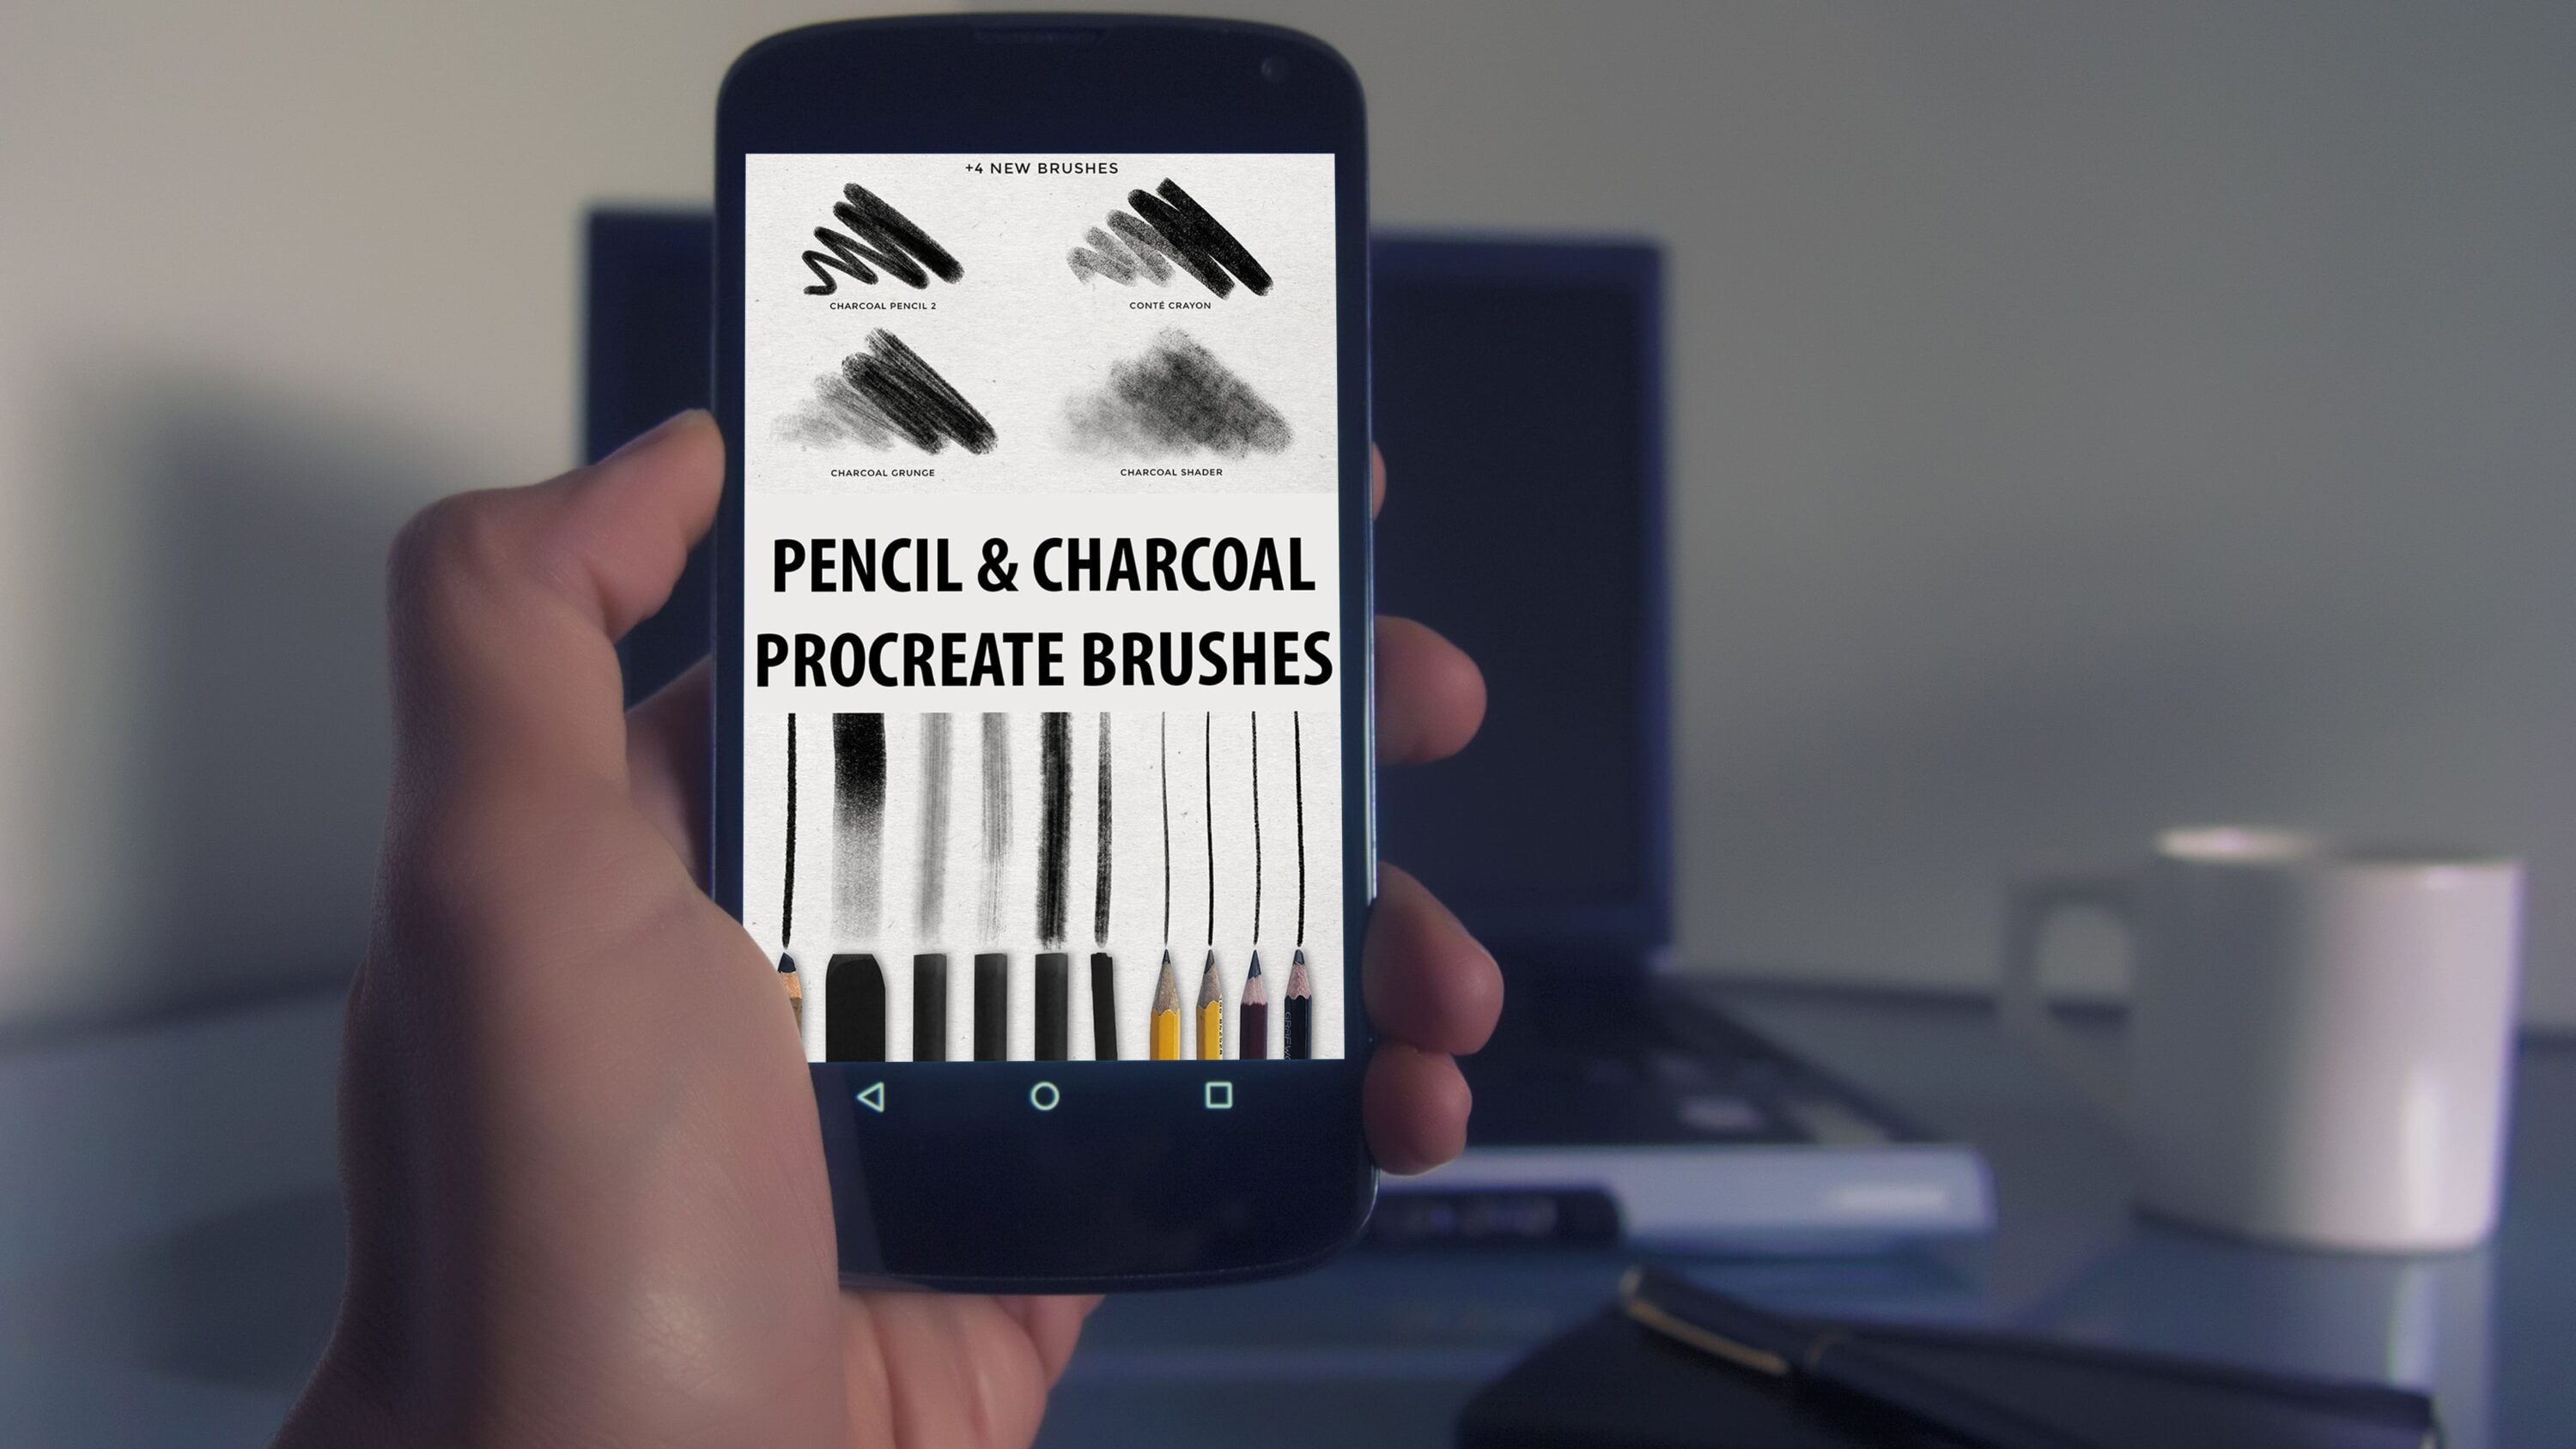 Mobile option of the Pencil & charcoal Procreate brushes.